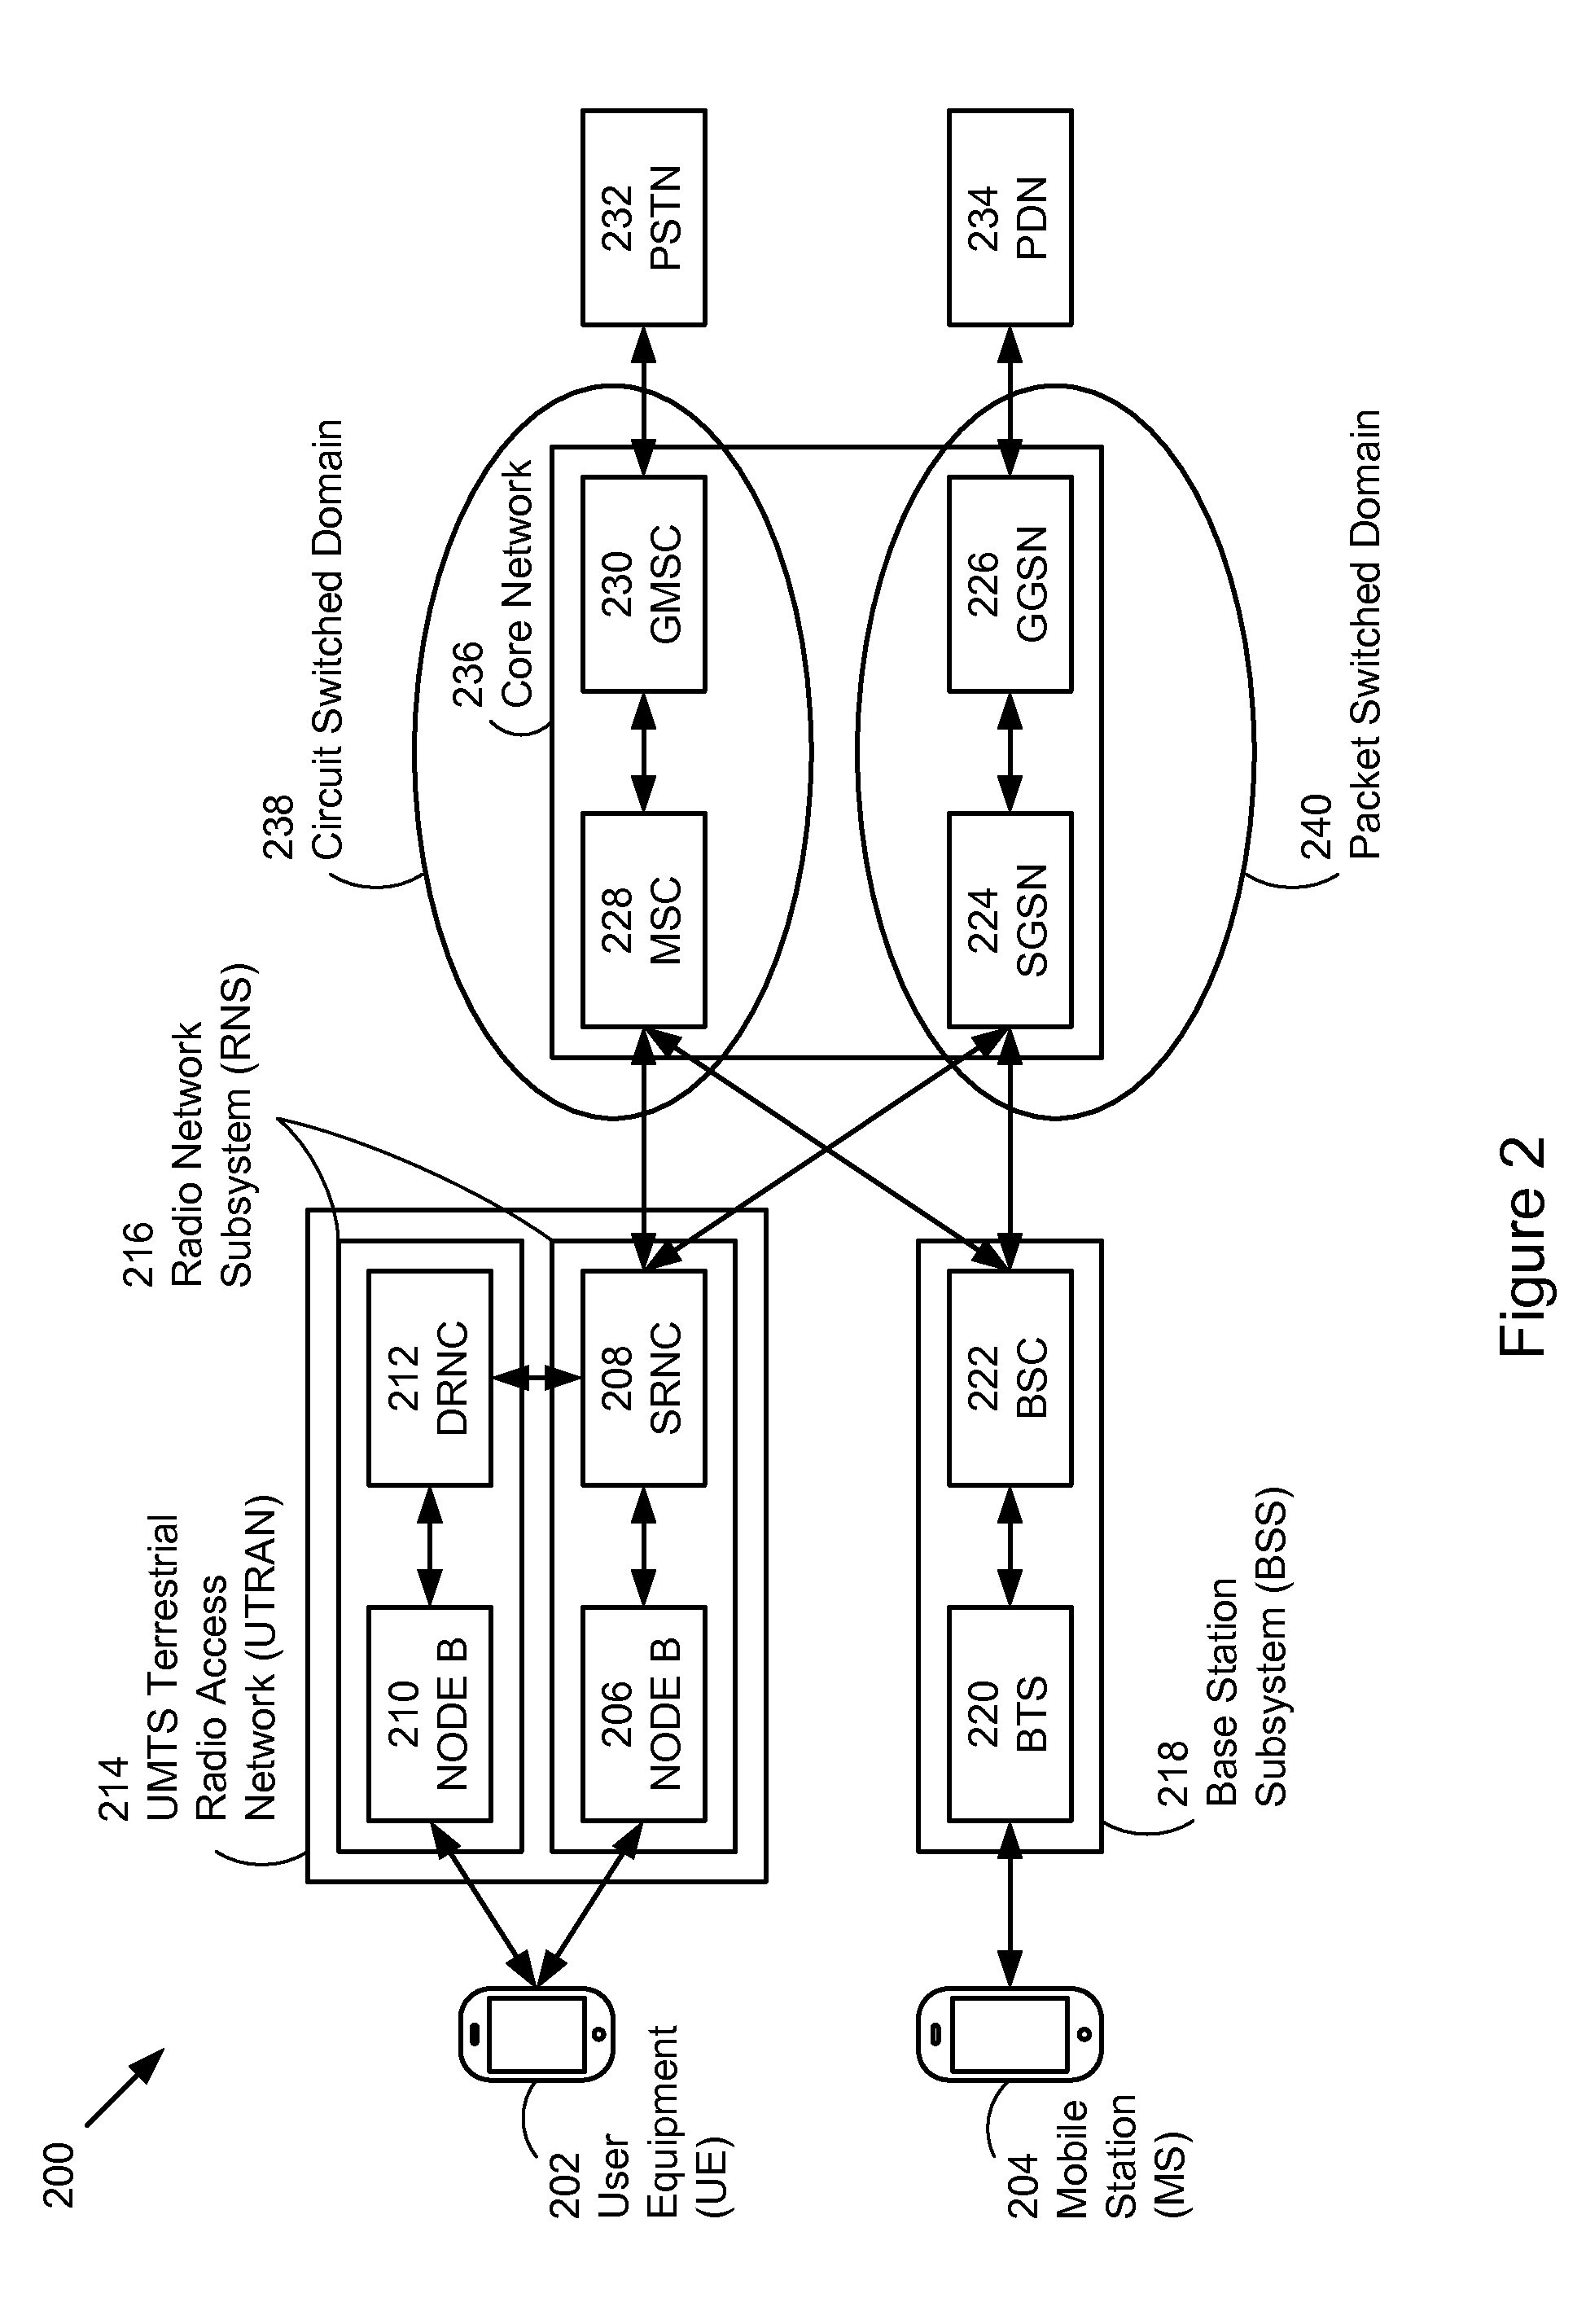 Method and apparatus for transport format selection in a mobile wireless device